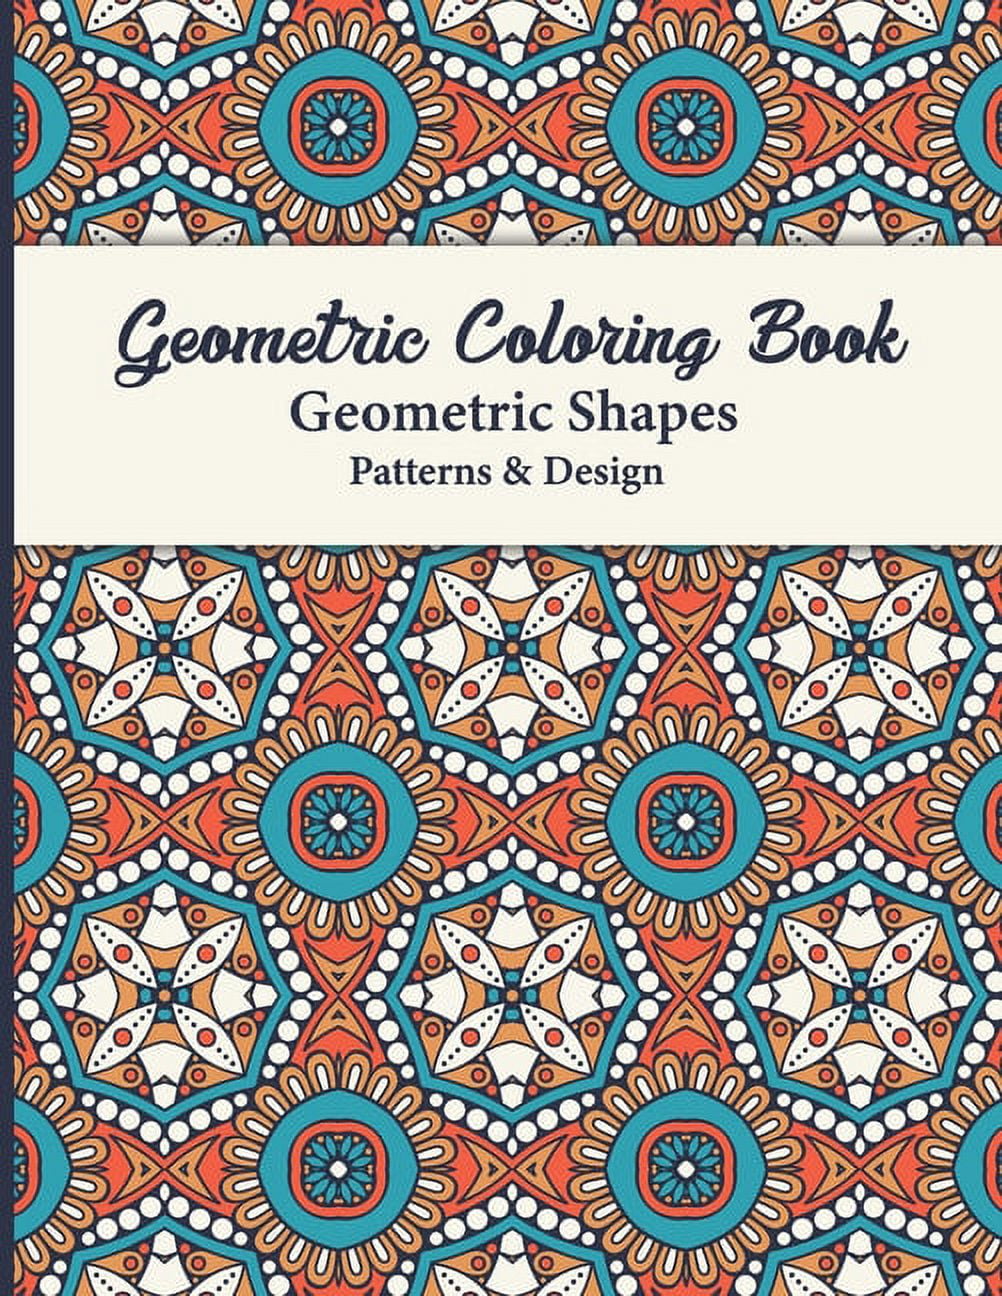 Pattern Coloring: Geometric Shapes and Patterns Coloring Book with Fun, Easy, and Relaxing Coloring Pages for Stress Relieve and Creativity Boost [Book]